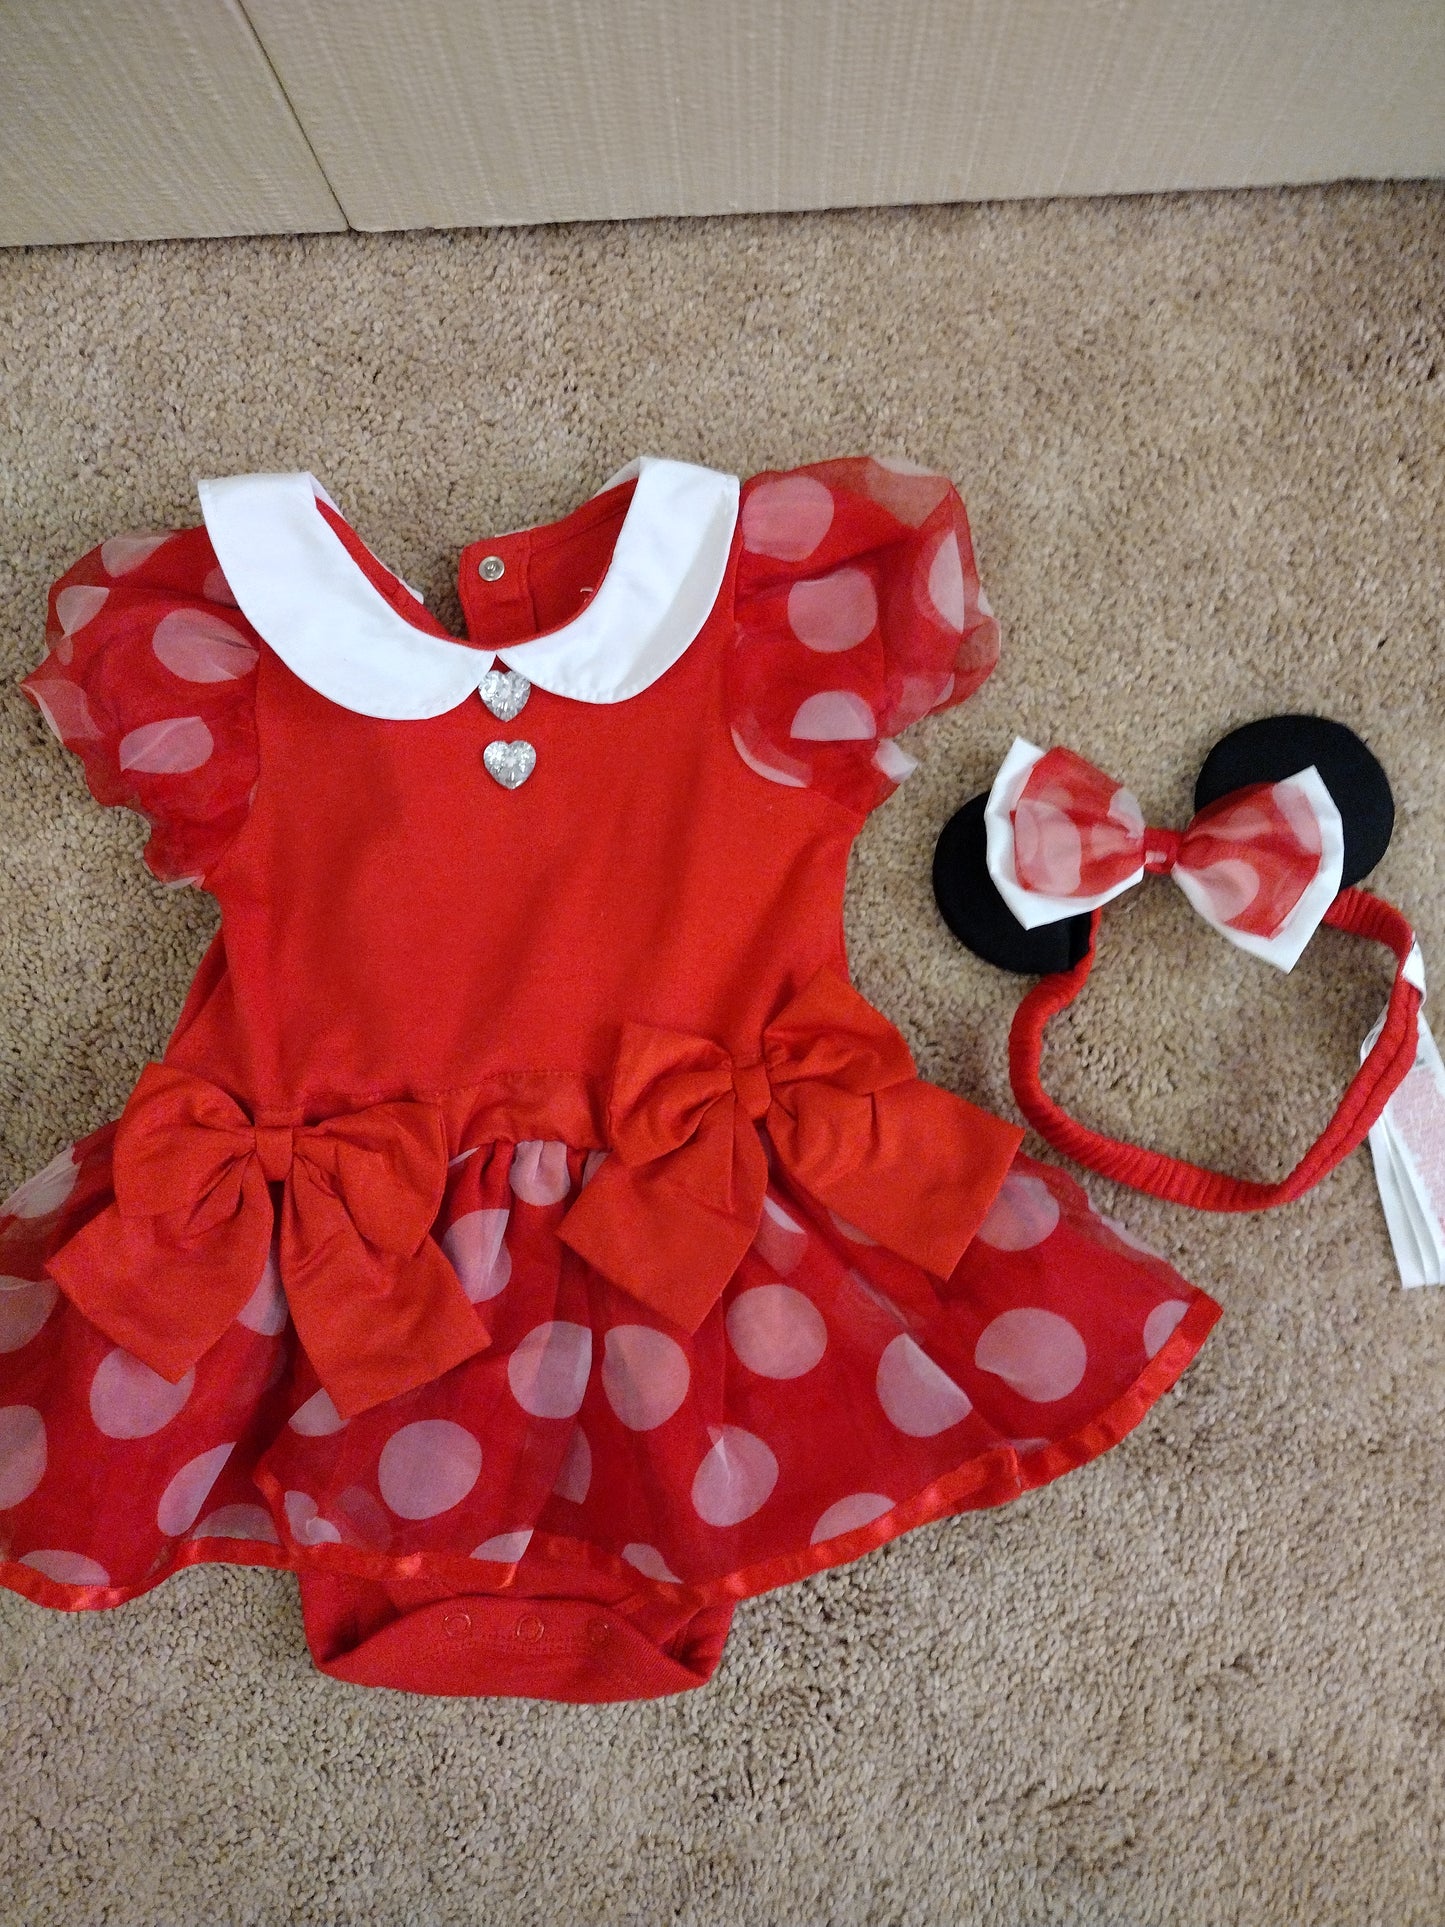 Disney Baby Minnie Mouse Dress With Headband 18-24 Months Body Suit One Piece